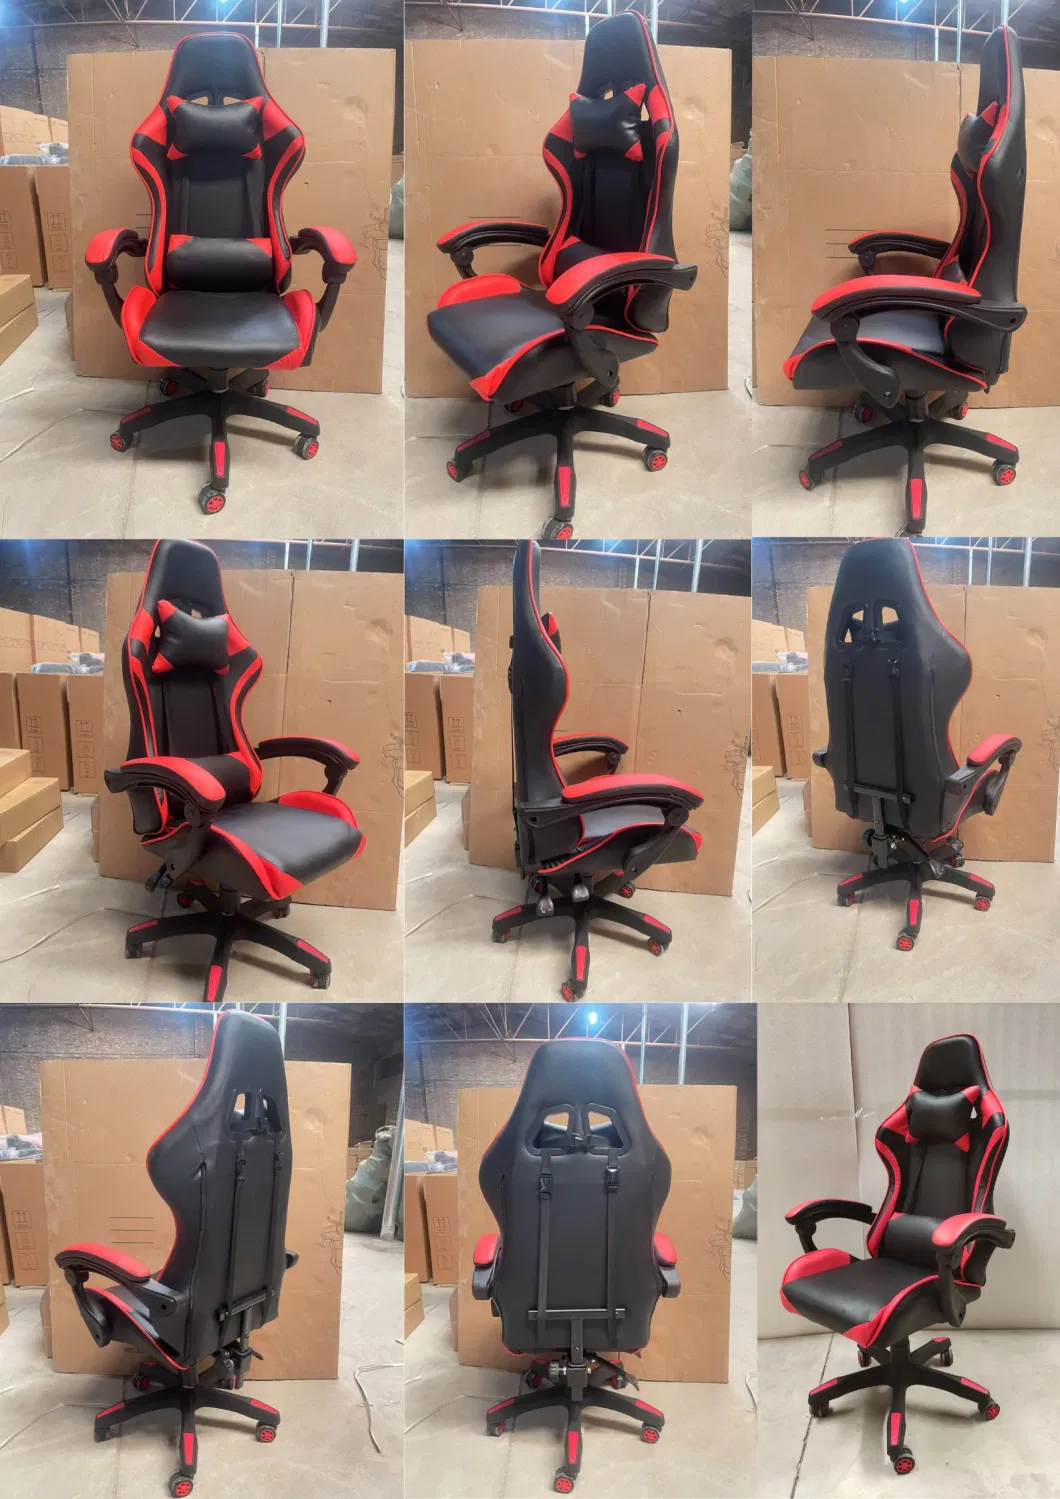 Computer Gaming Chair Black and Red Ergonomic High Back Cheap Price 1 Piece Free Shipping Gamer Chair